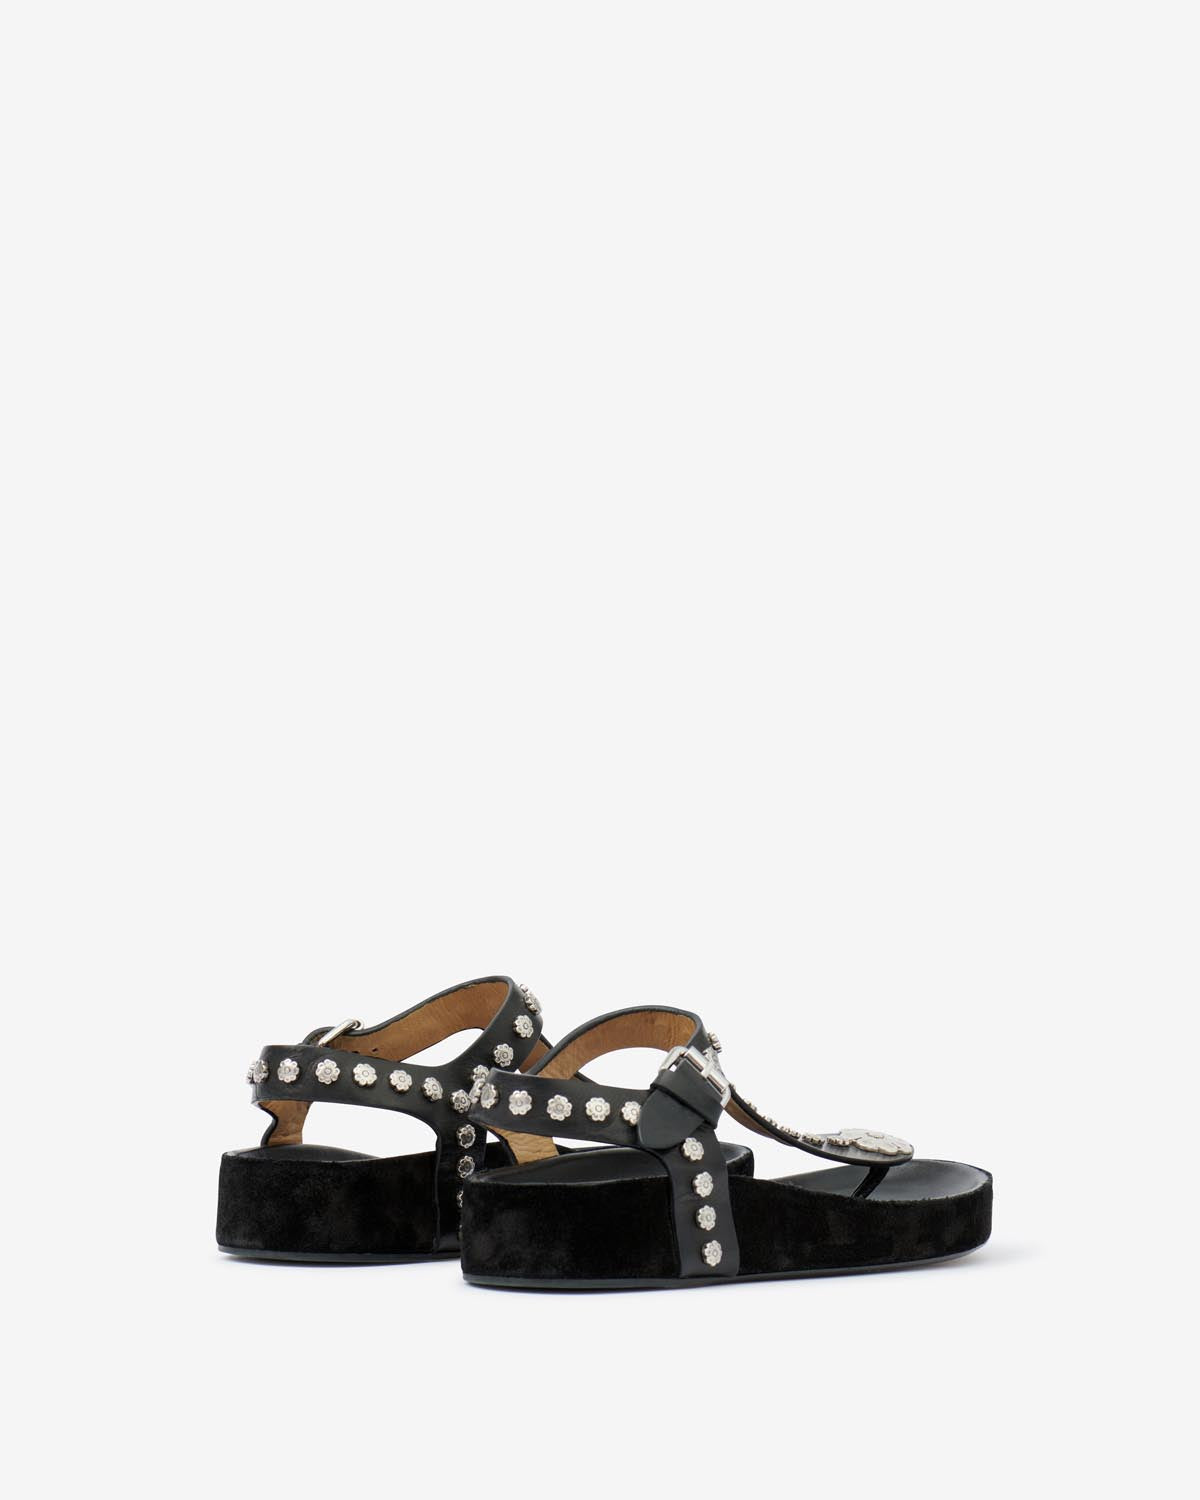 Enore sandals Woman Black and silver 4